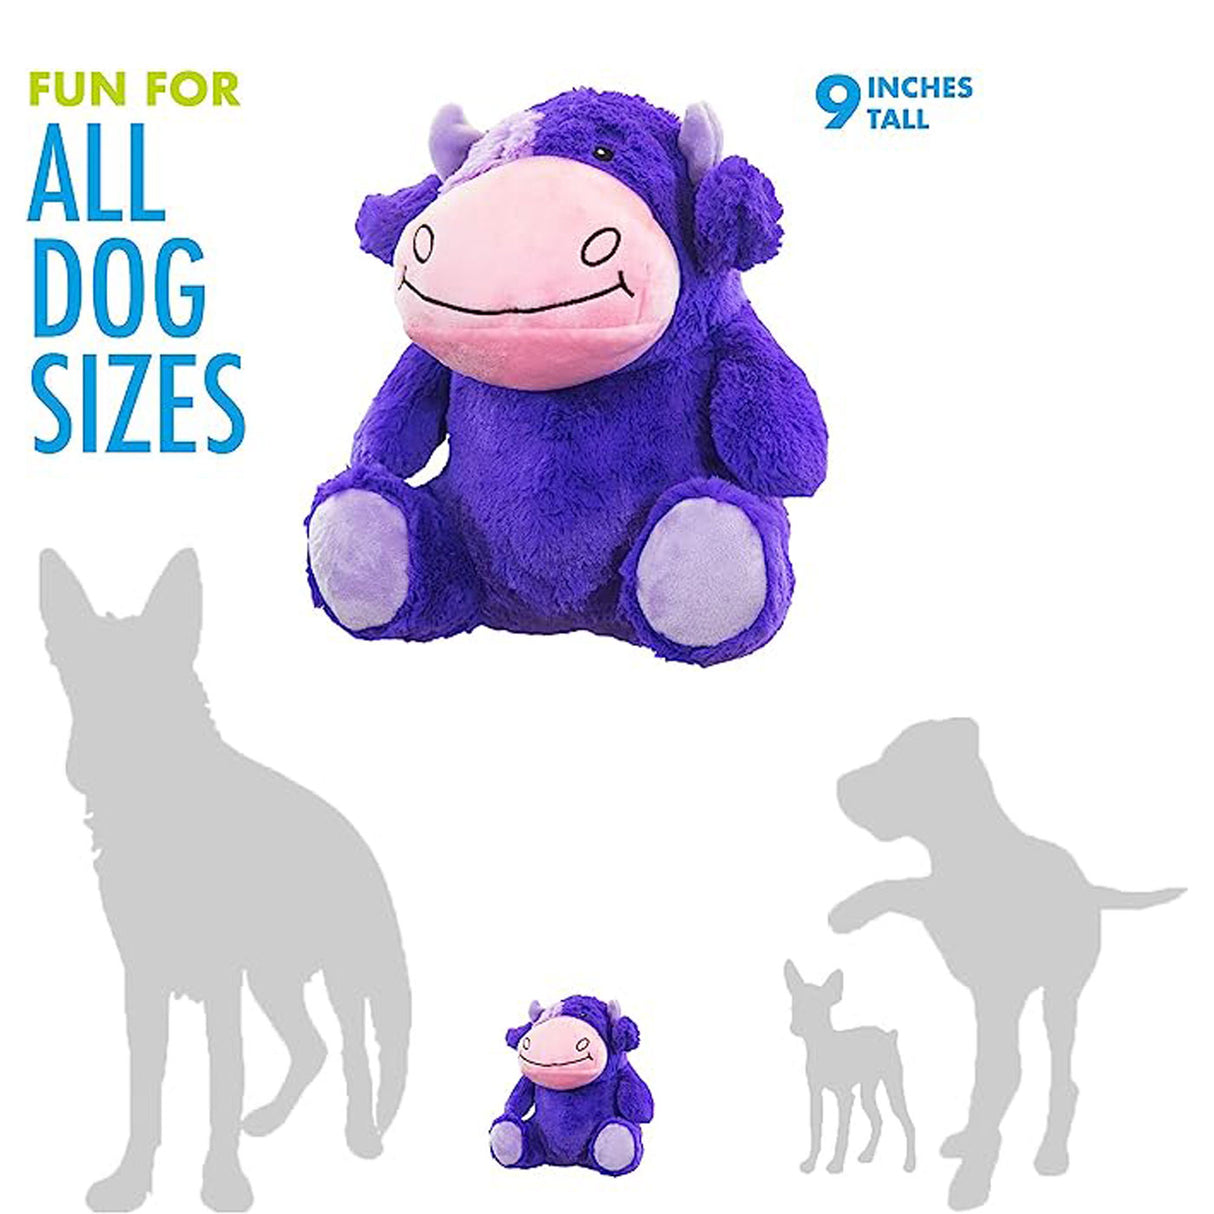 Hero Dog Toy Chuckles Cow 2.0